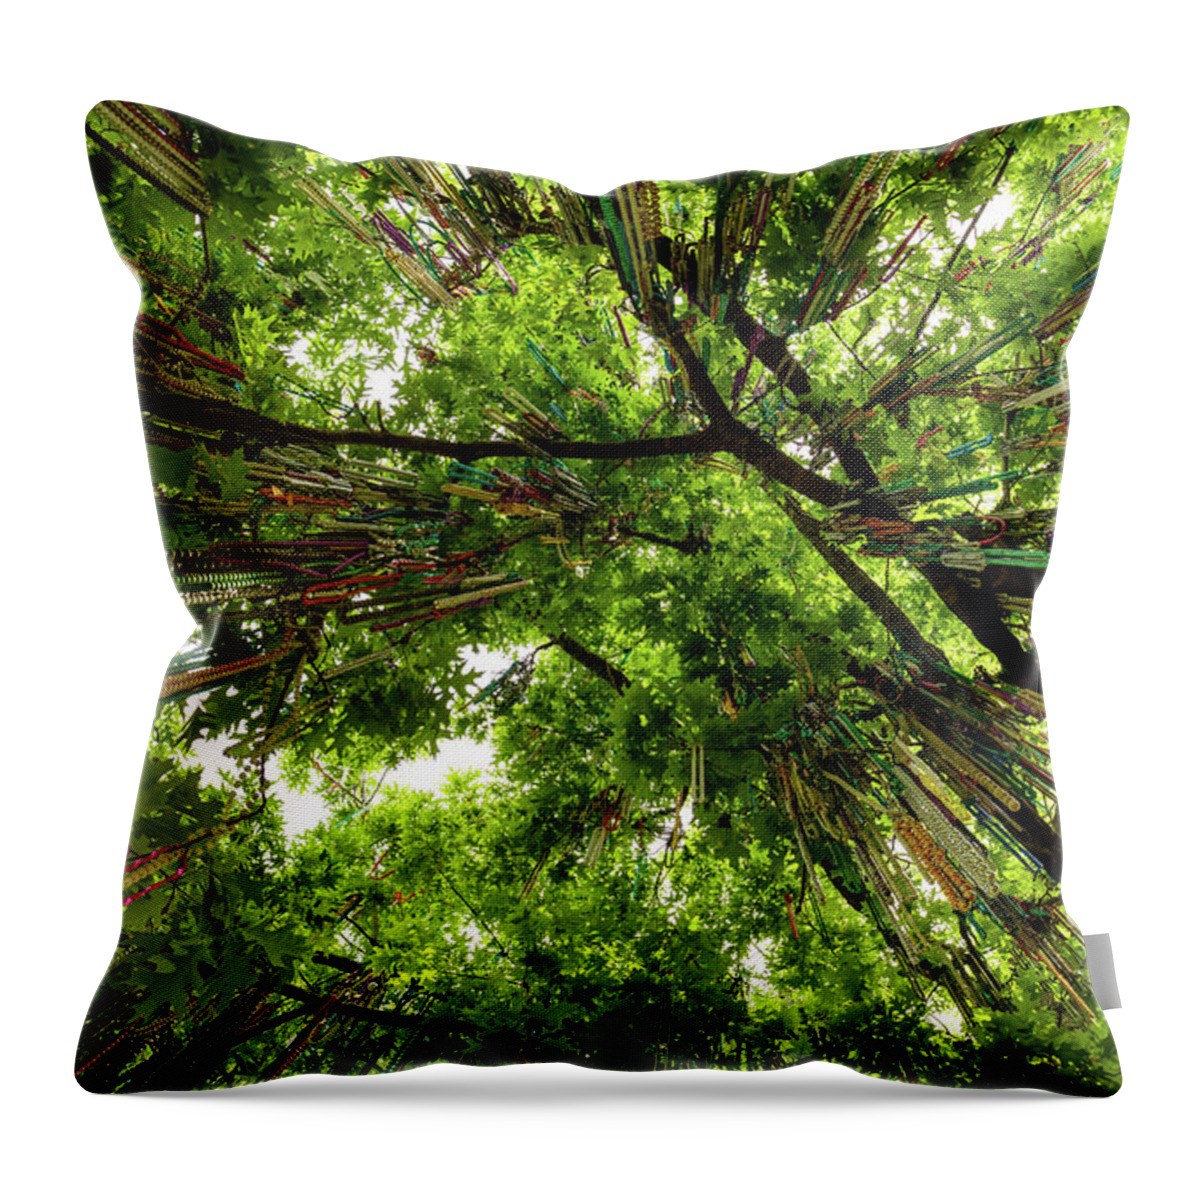 Louisiana Throw Pillow featuring the photograph Tulane Mardi Gras Beads by Raul Rodriguez